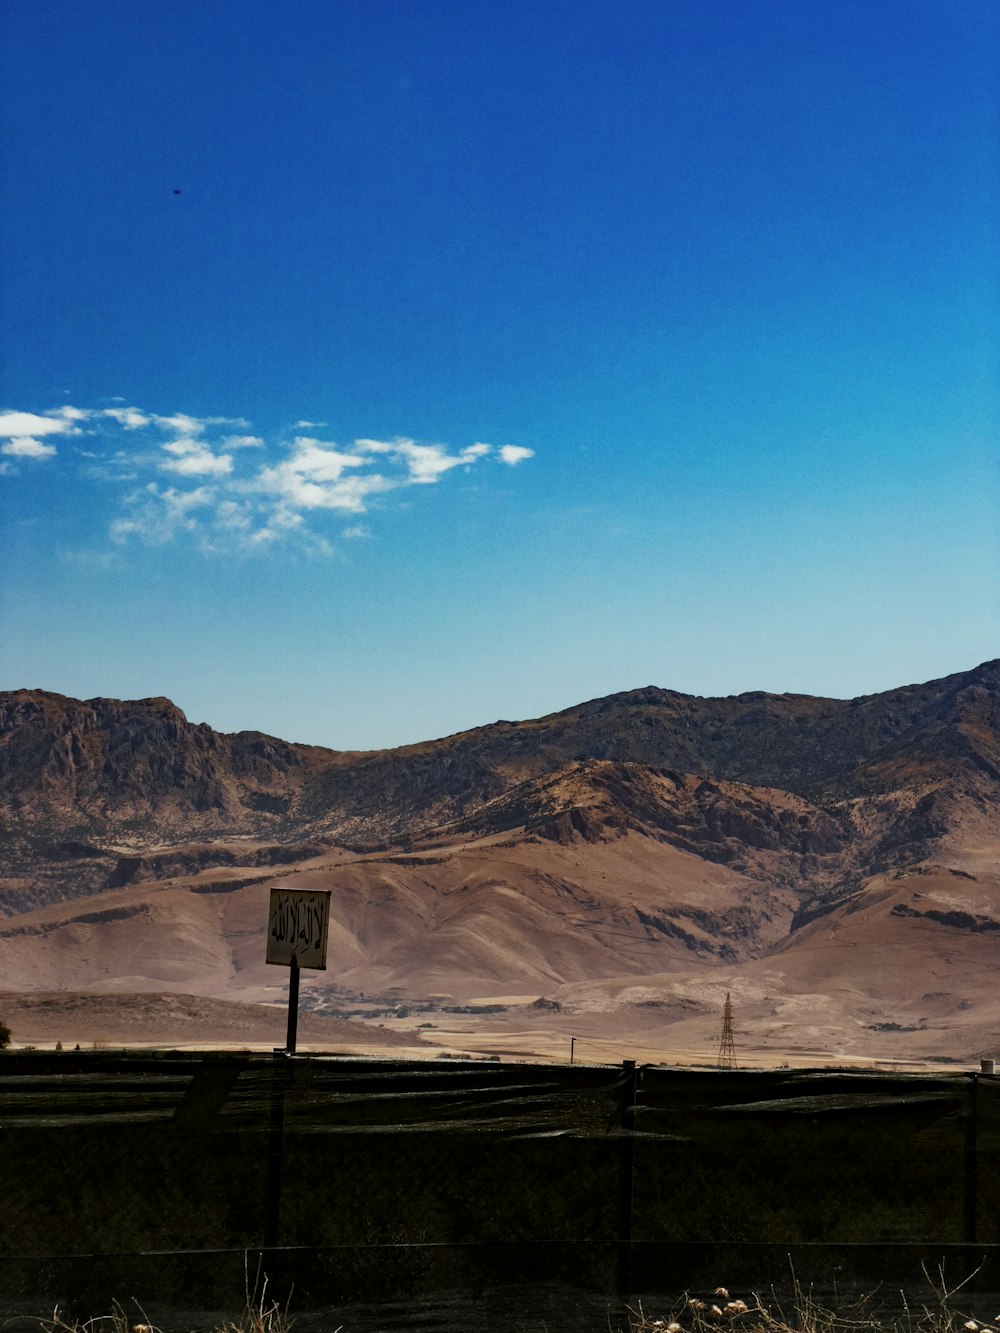 a view of a mountain range with a sign in the foreground